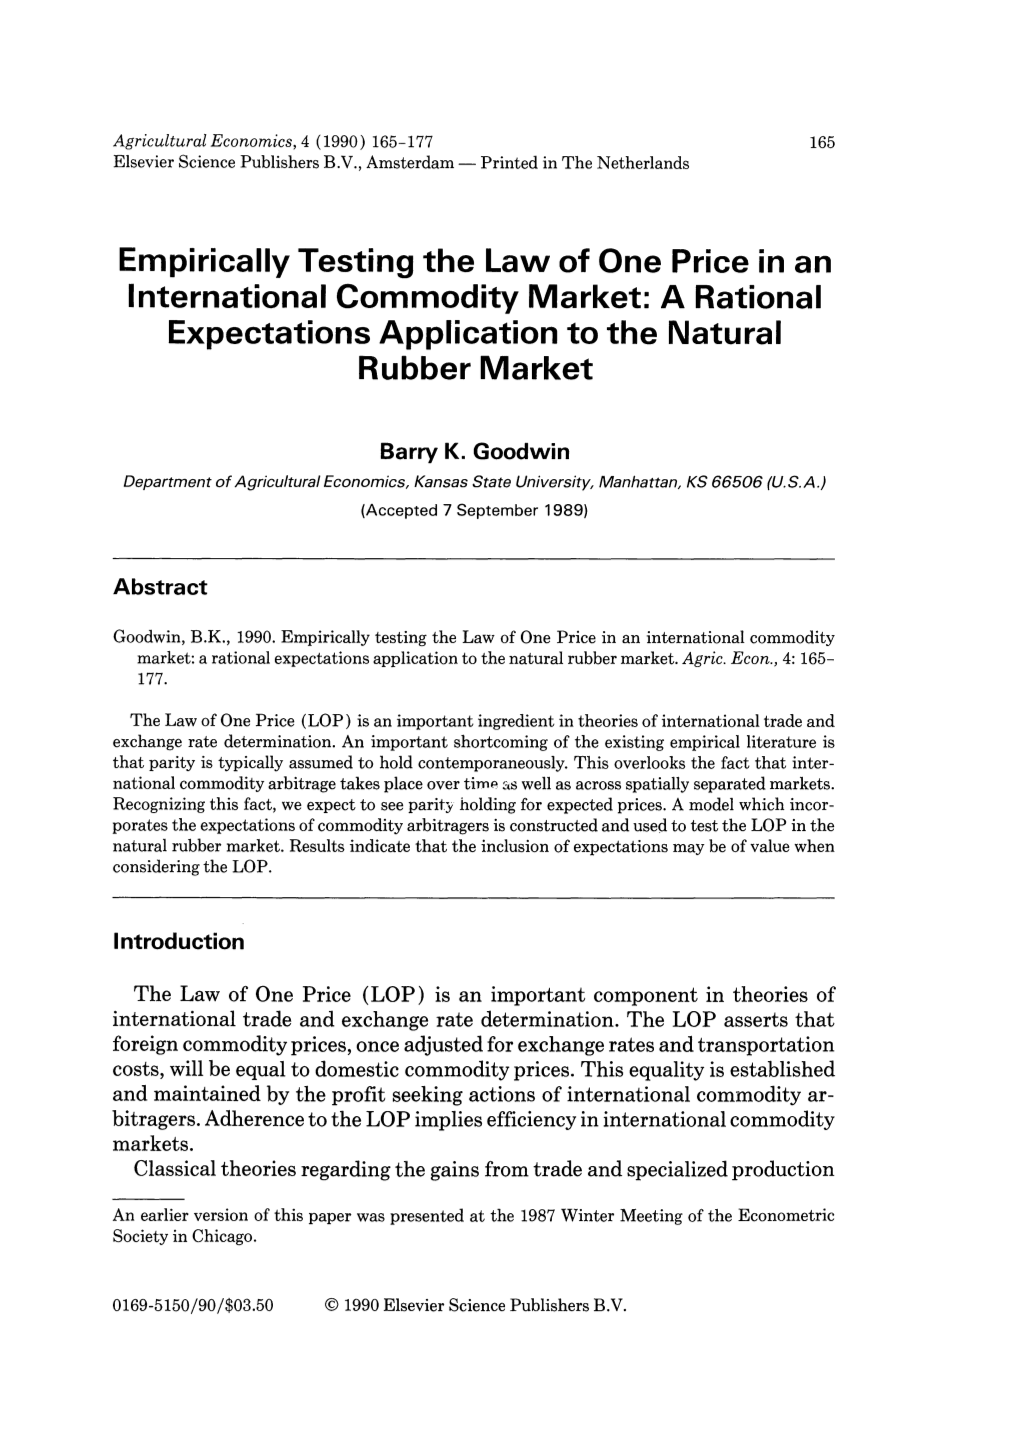 Empirically Testing the Law of One Price in an International Commodity Market: a Rational Expectations Application to the Natural Rubber Market